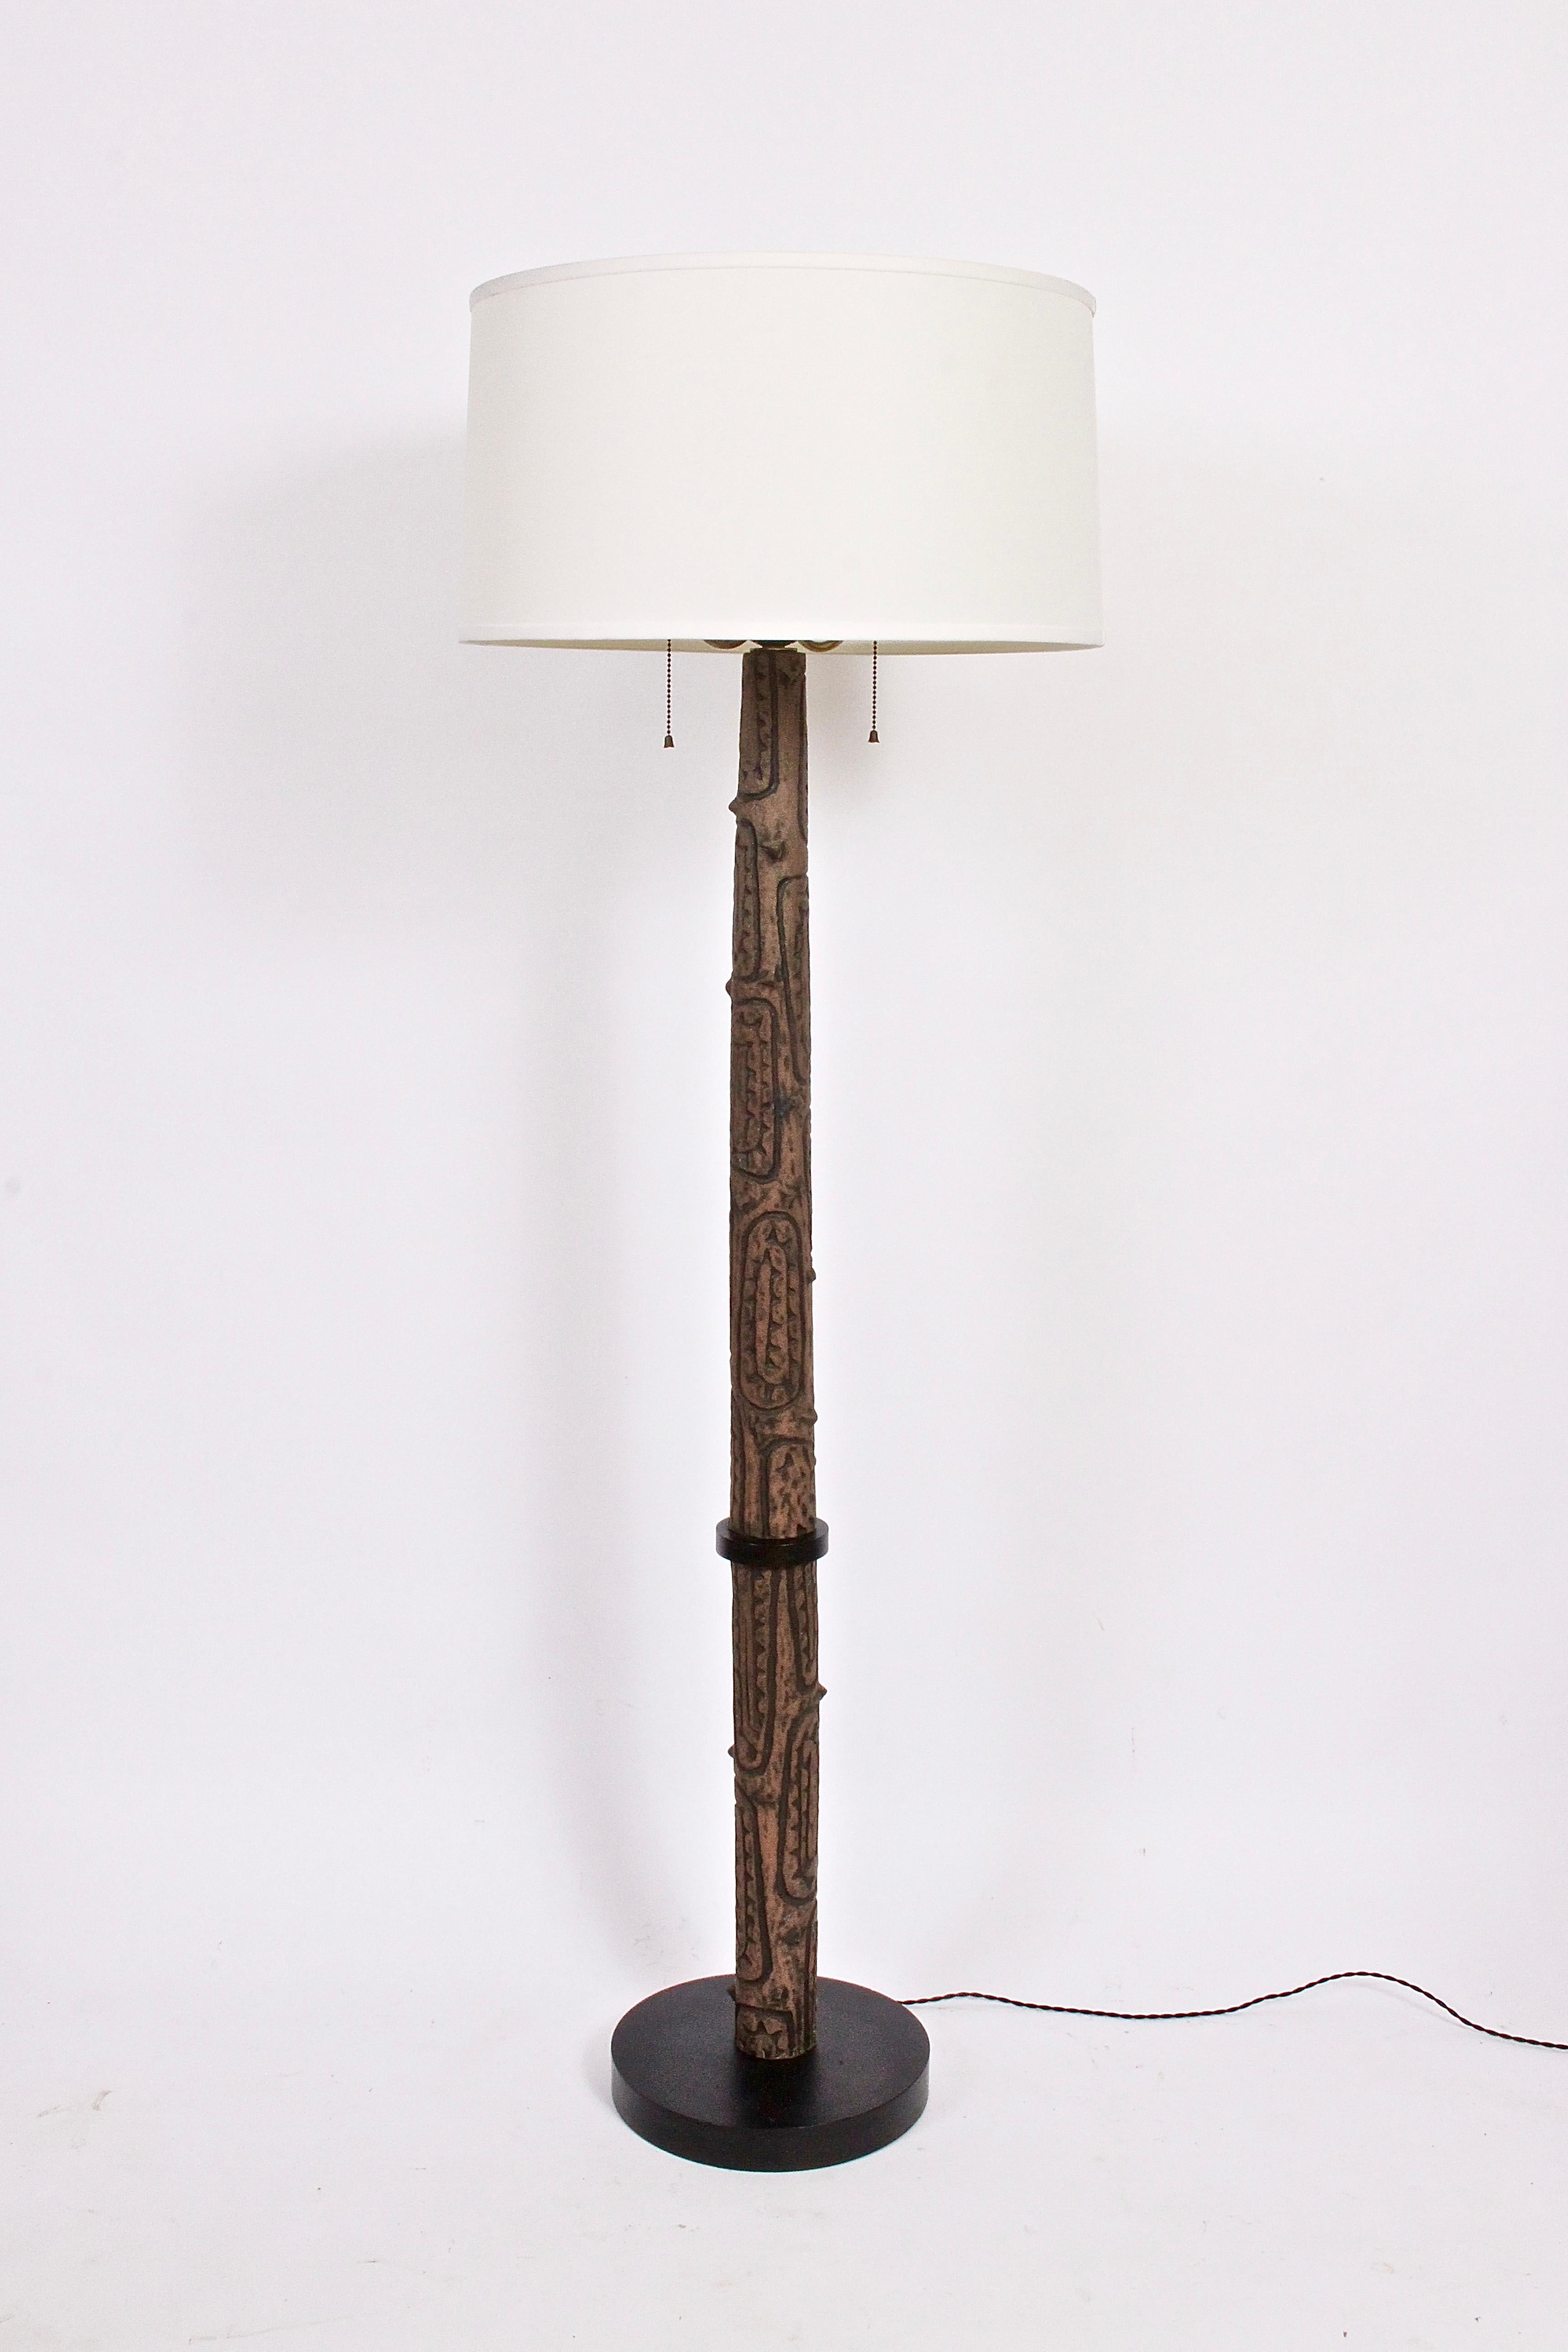 Mid-20th Century Lee Rosen for Design-Technics Incised Arboreal Pottery Floor Lamp, 1965 For Sale